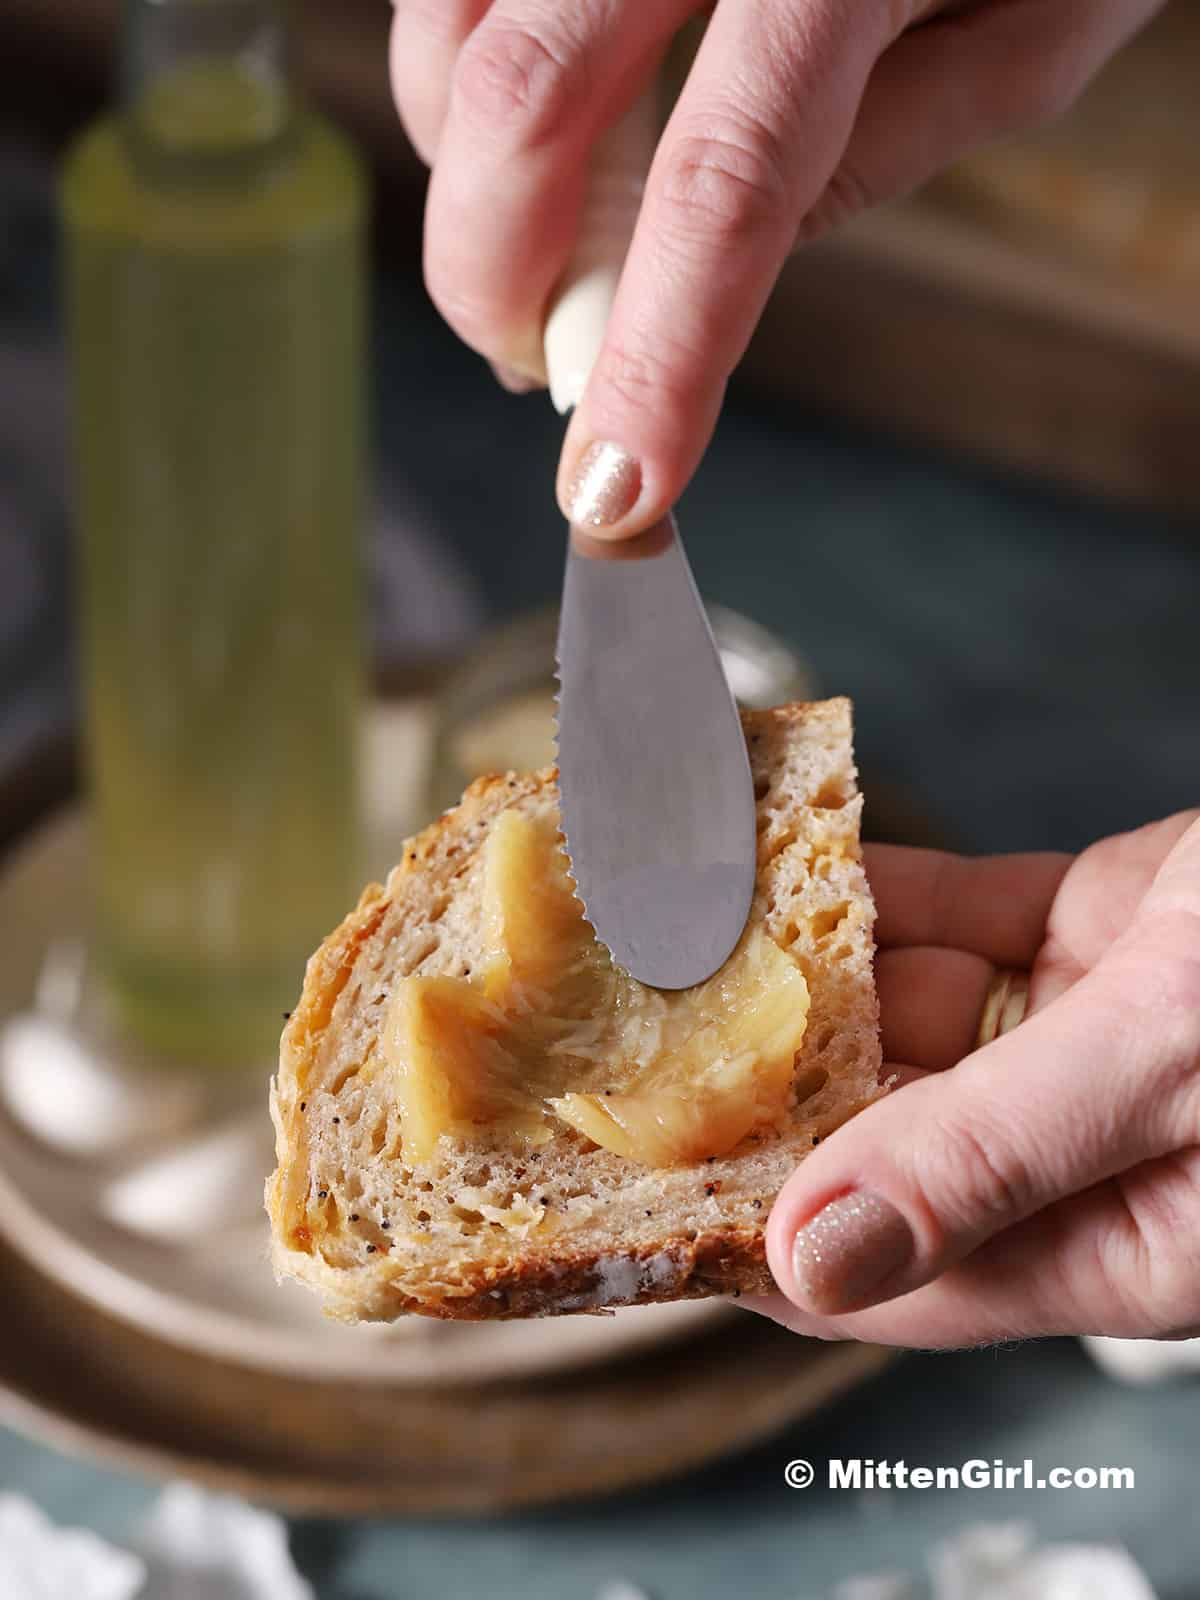 A hand spreading a clove of garlic confit on a slice of bread.